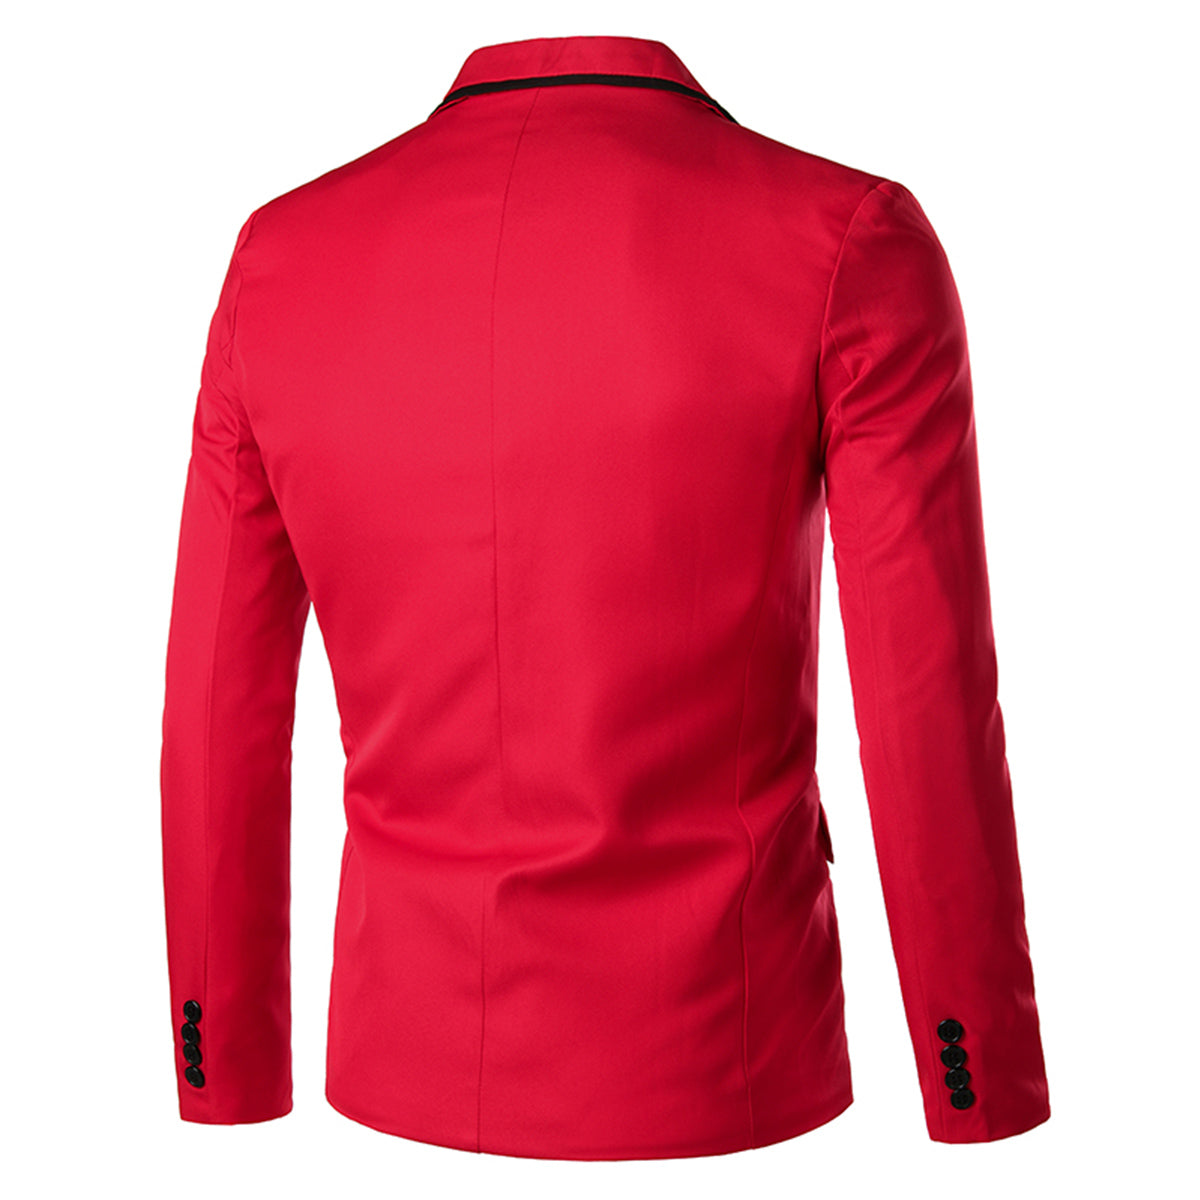 Men's One Button Solid Color Casual Blazer Red